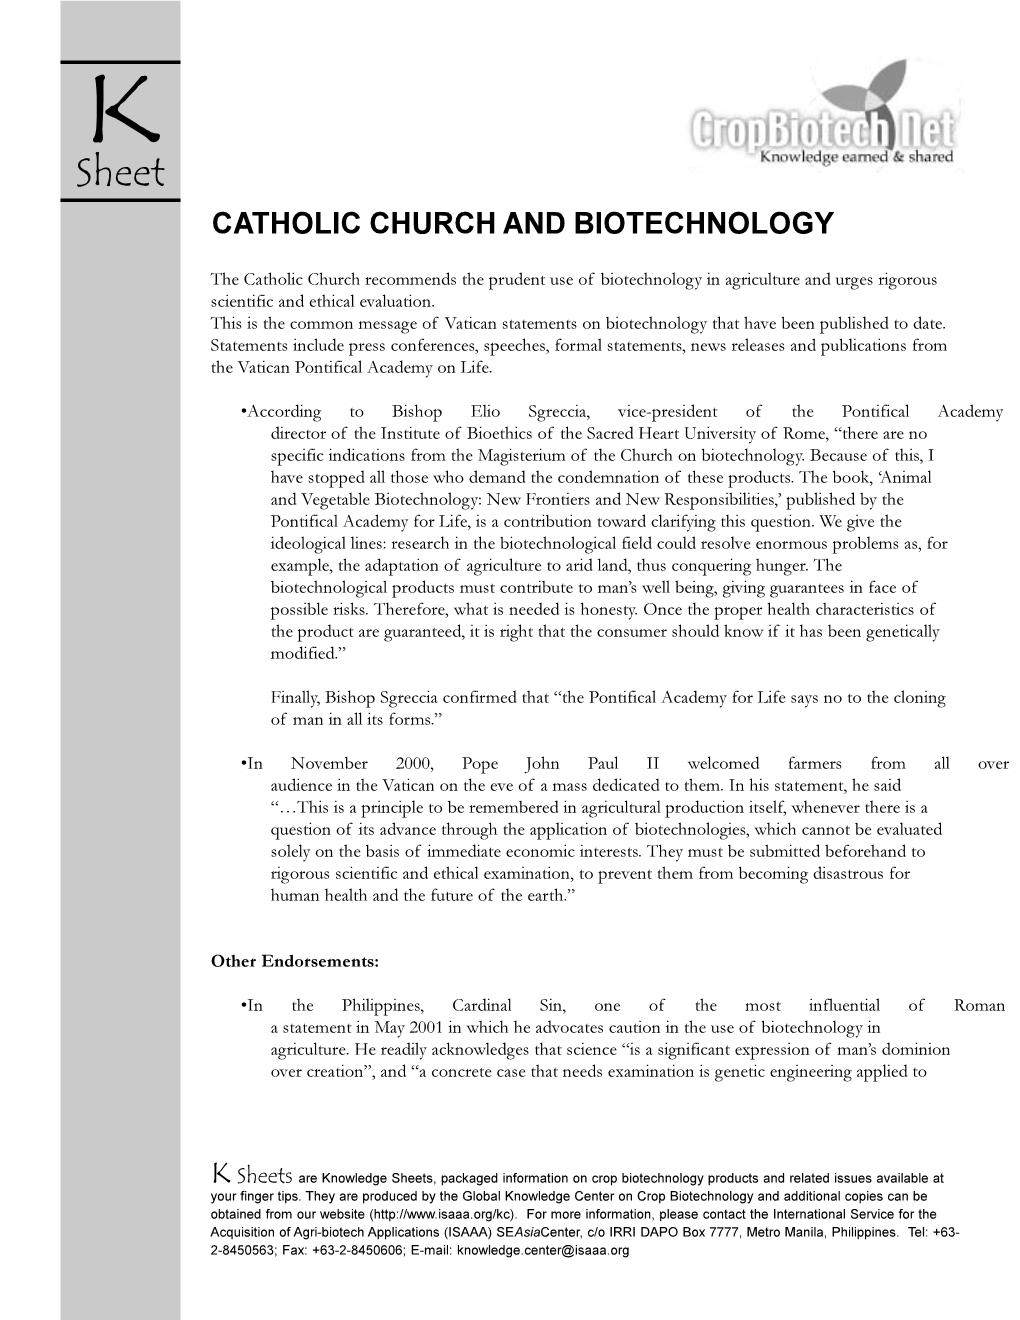 Church and Biotechnology